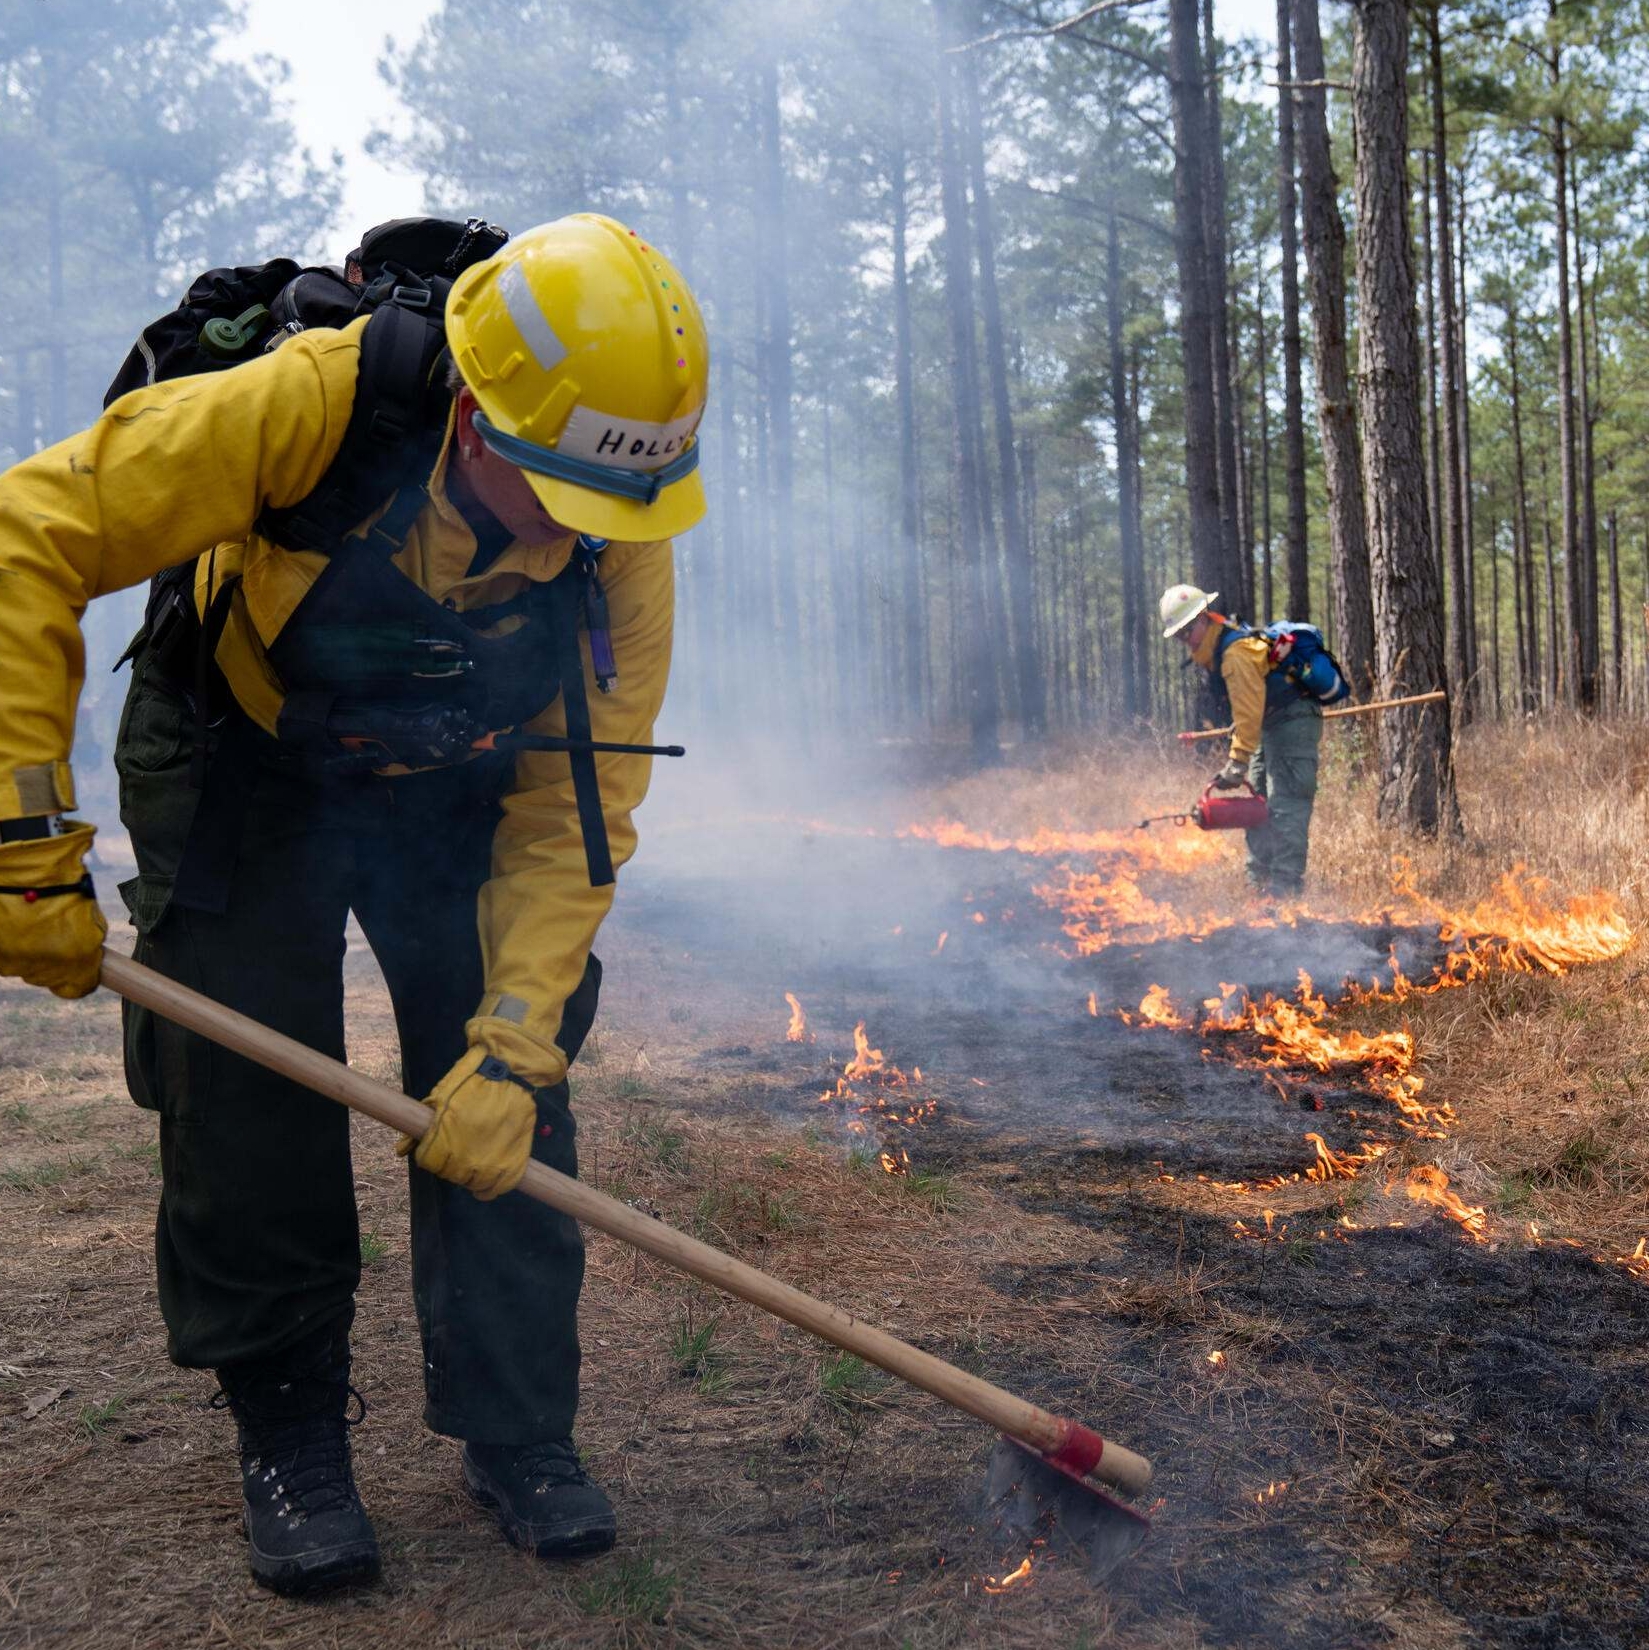 A firefighter manages a controlled burn in a forest.